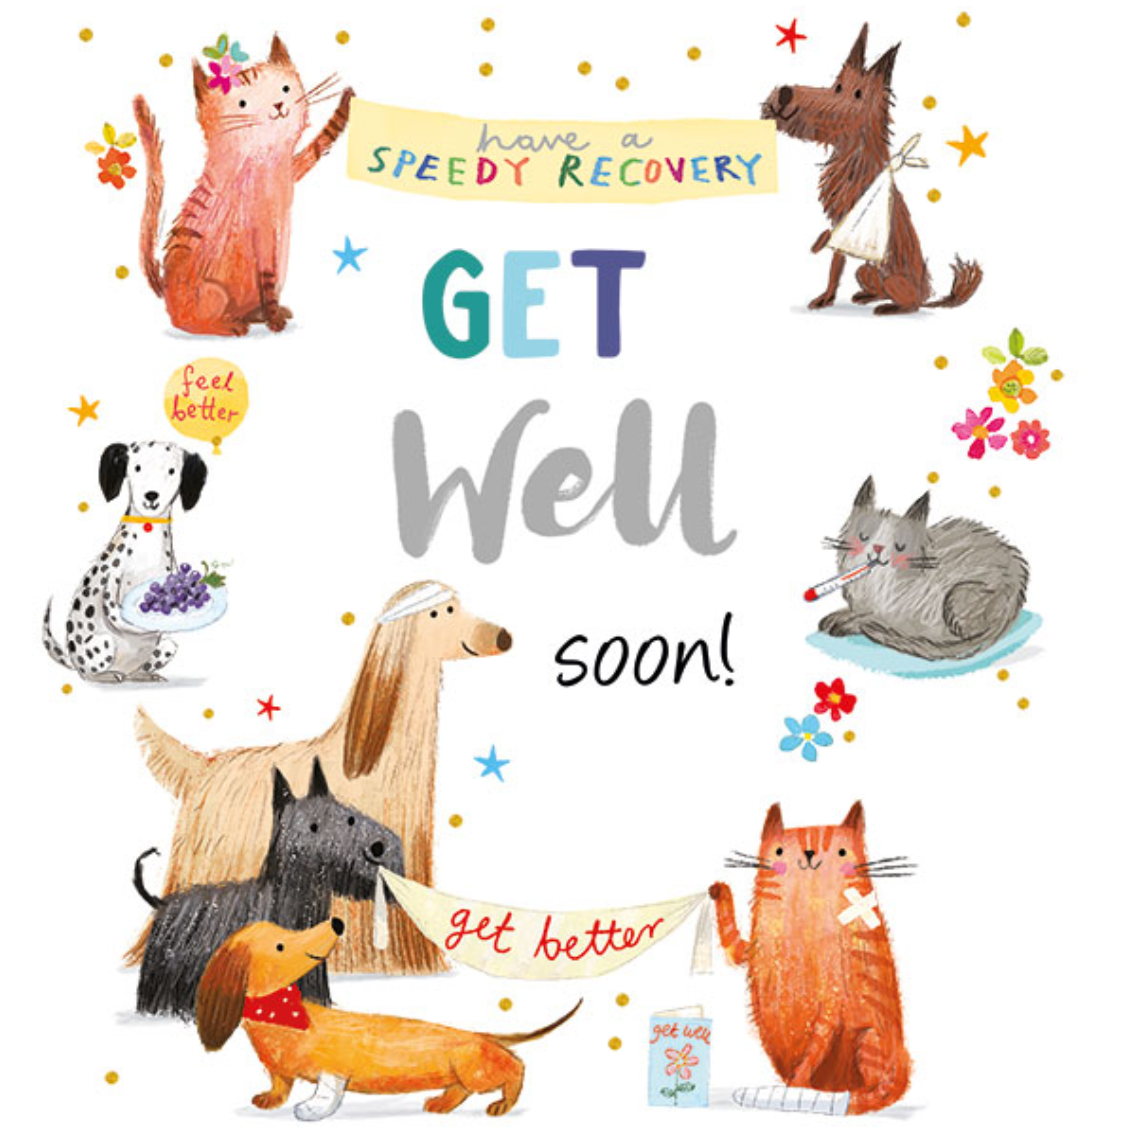 Get Well Soon - OCCZ037 - Strode Park Foundation